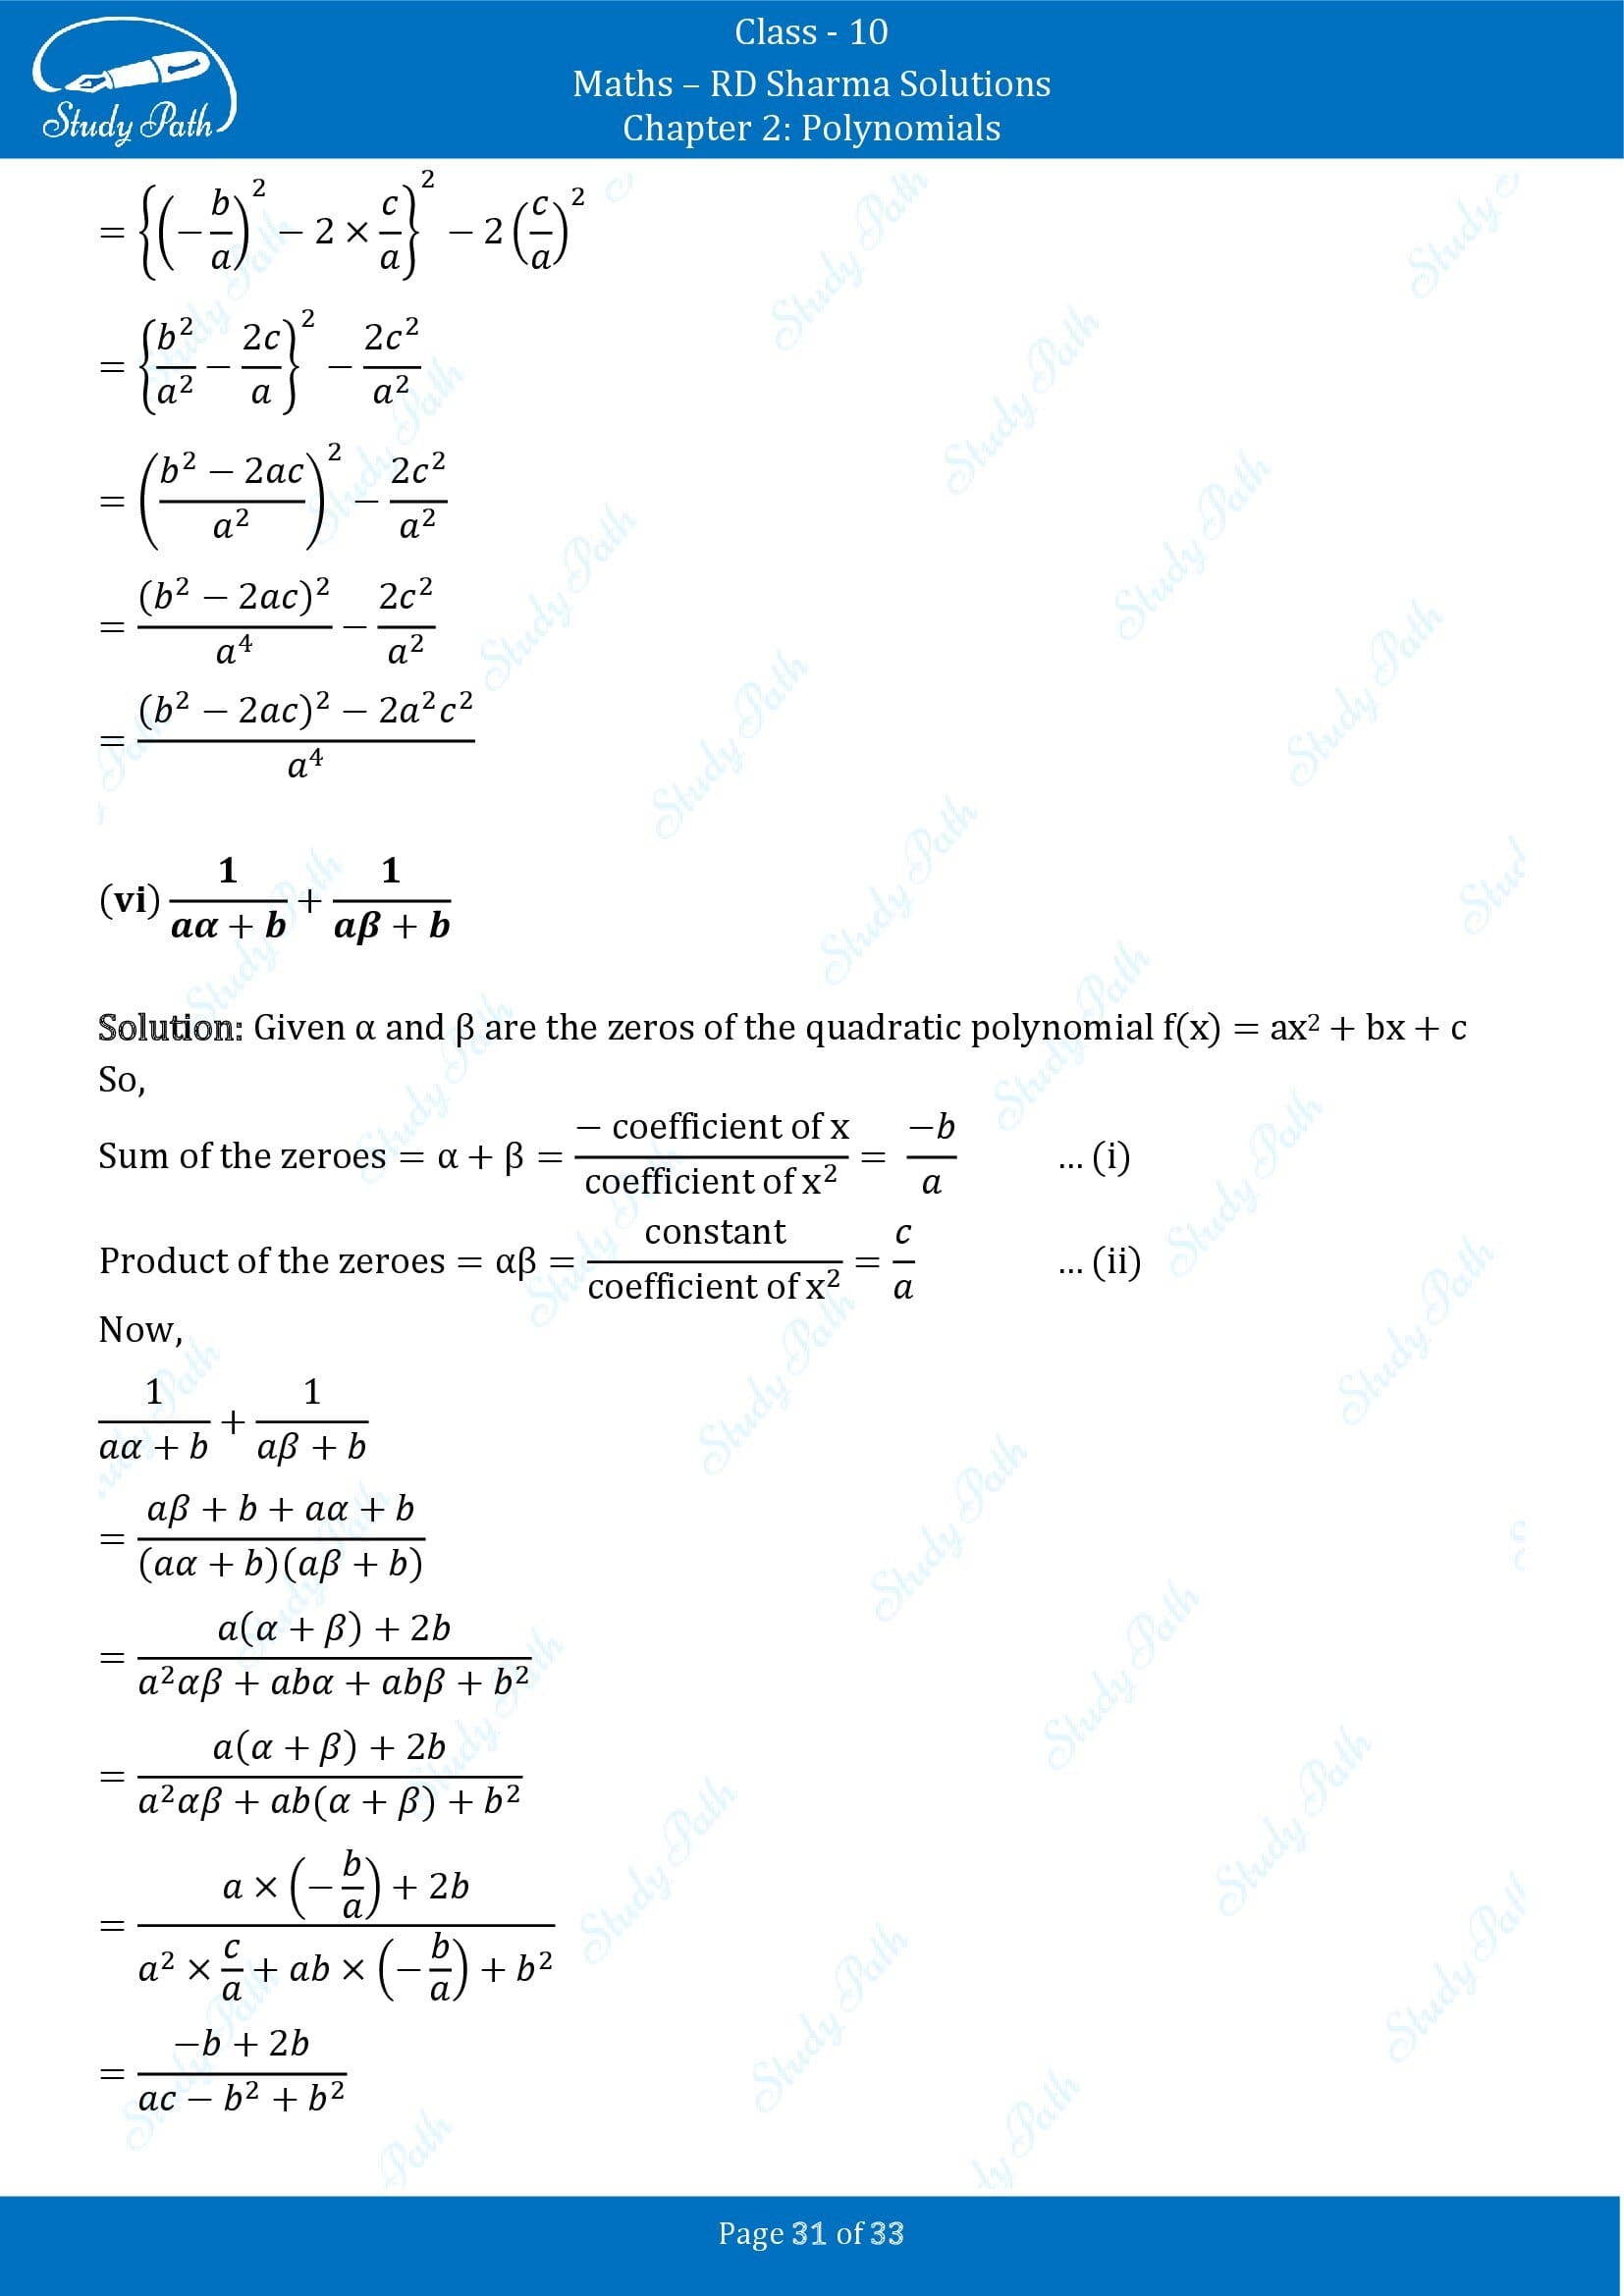 RD Sharma Solutions Class 10 Chapter 2 Polynomials Exercise 2.1 00031